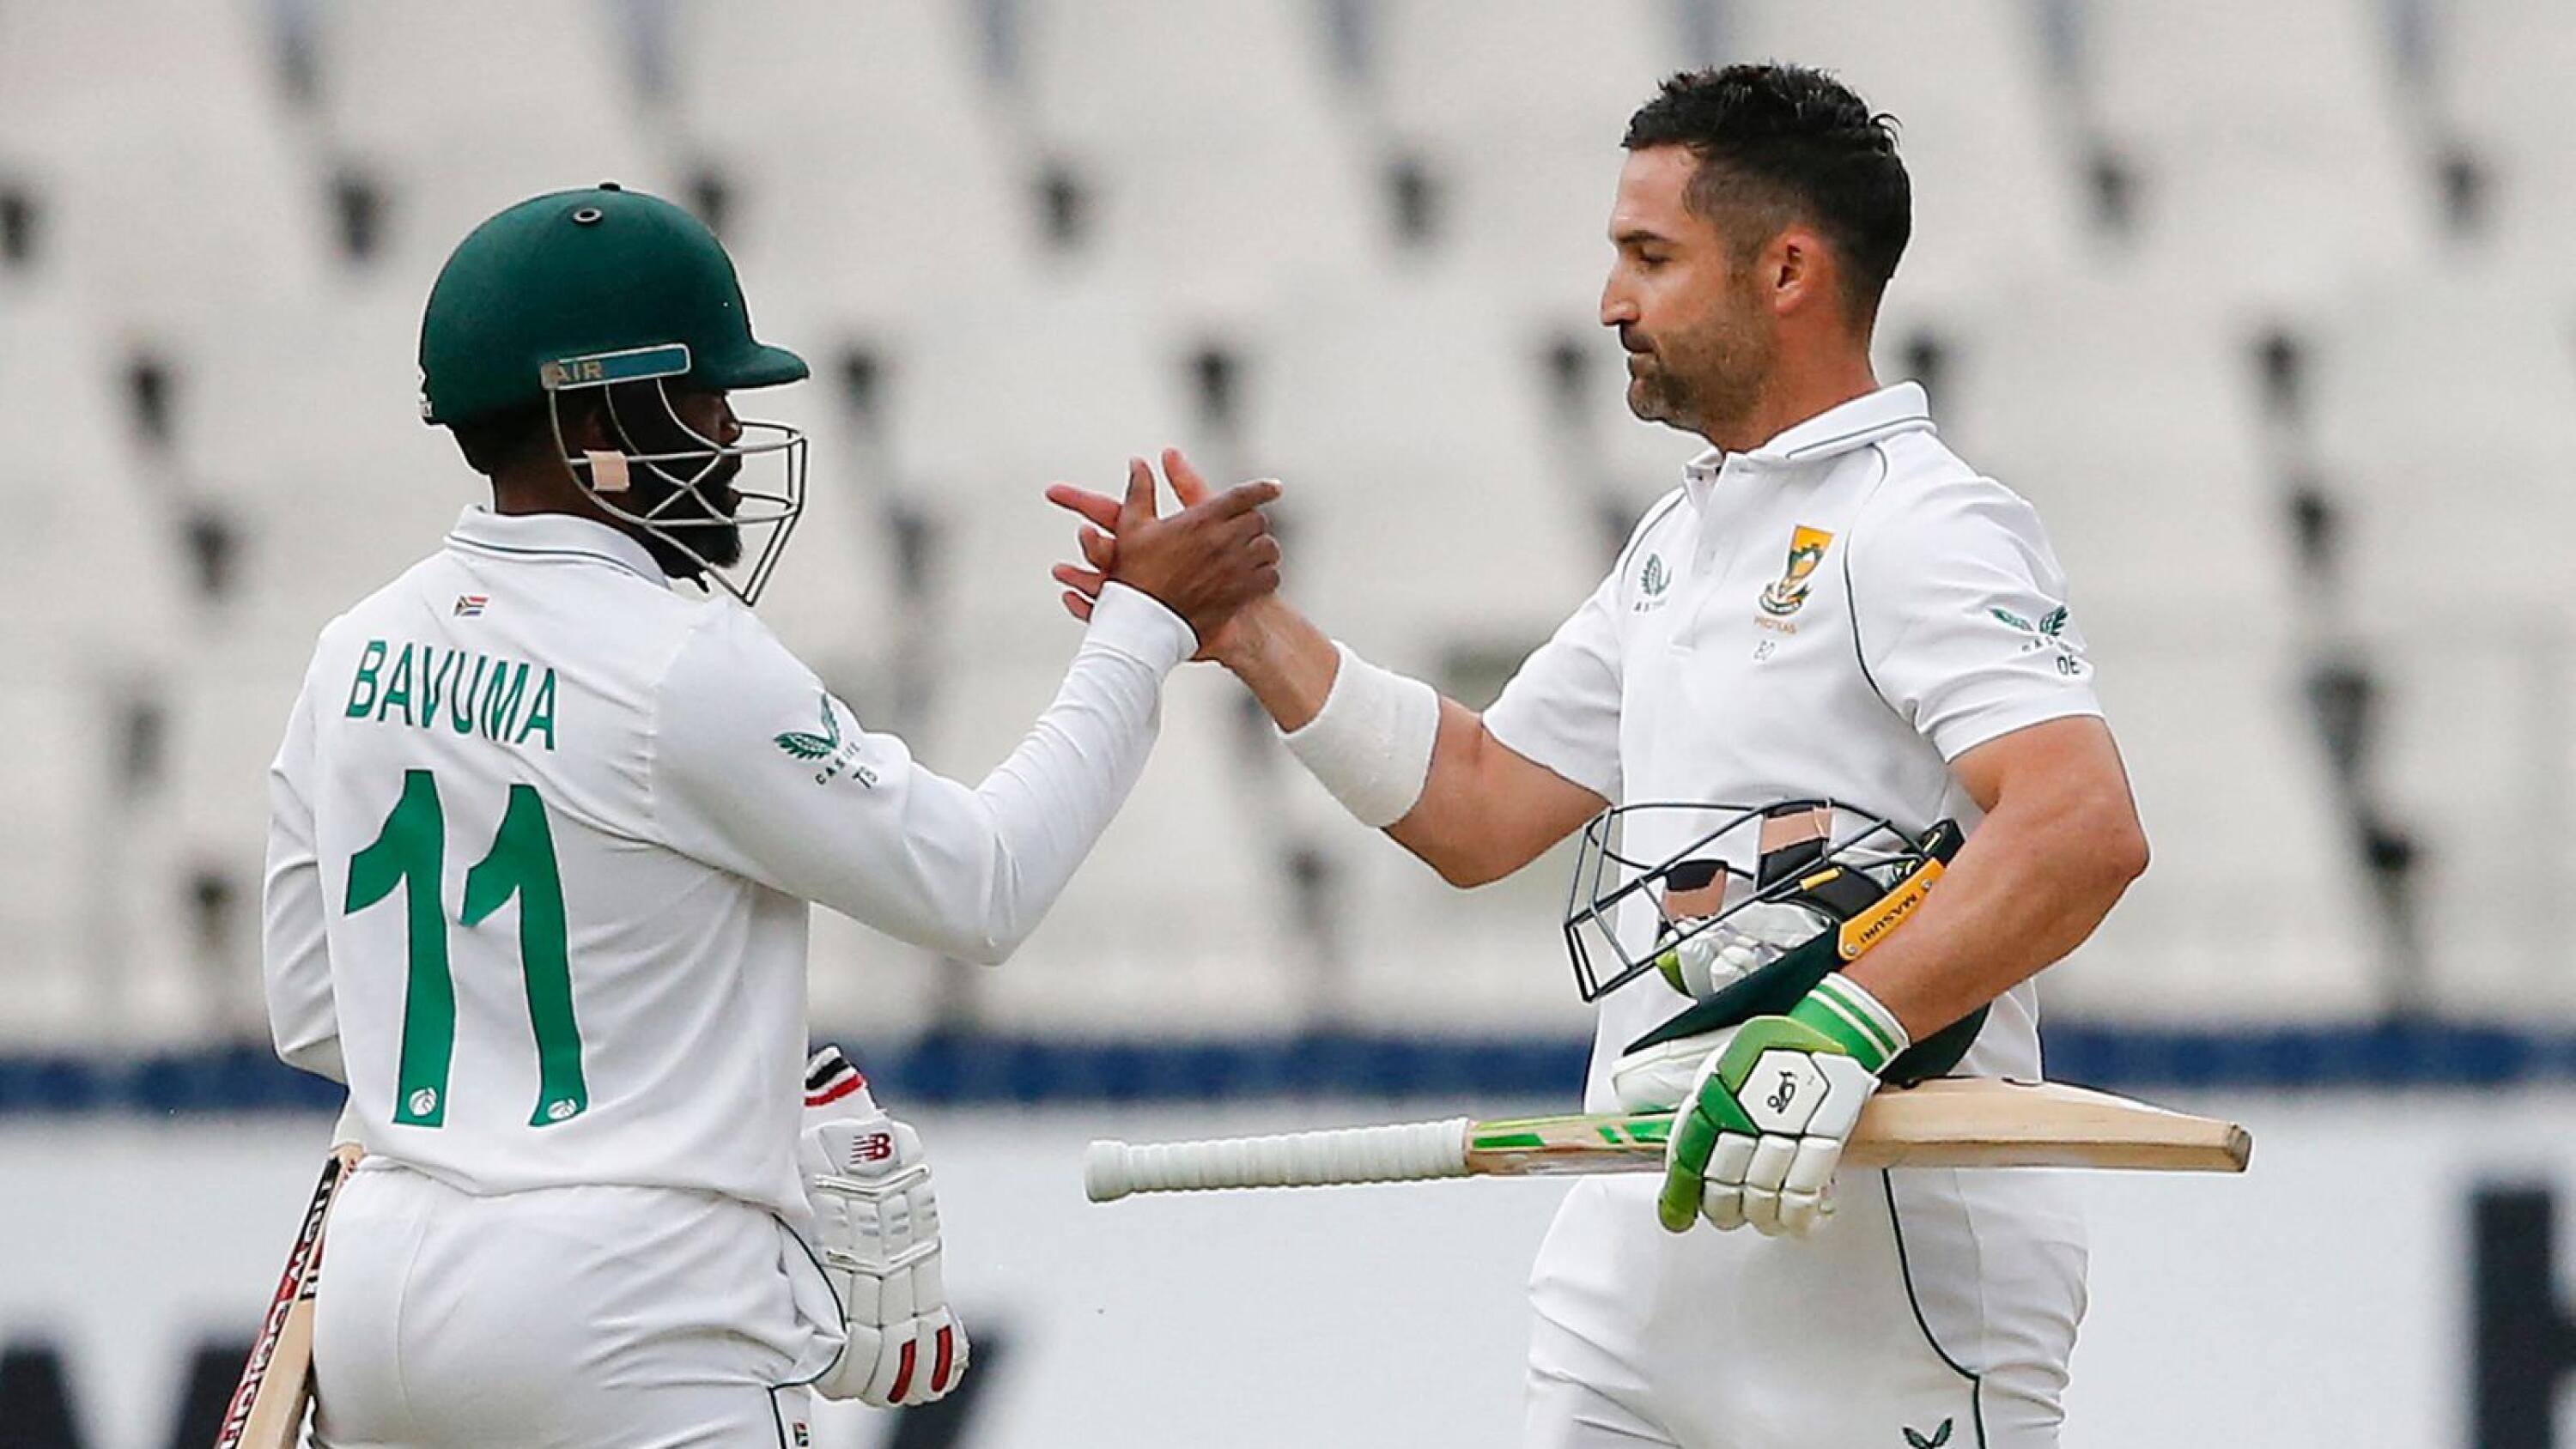 Temba Bavuma and Dean Elgar in action during the second Test cricket match between South Africa and India at The Wanderers Stadium in January